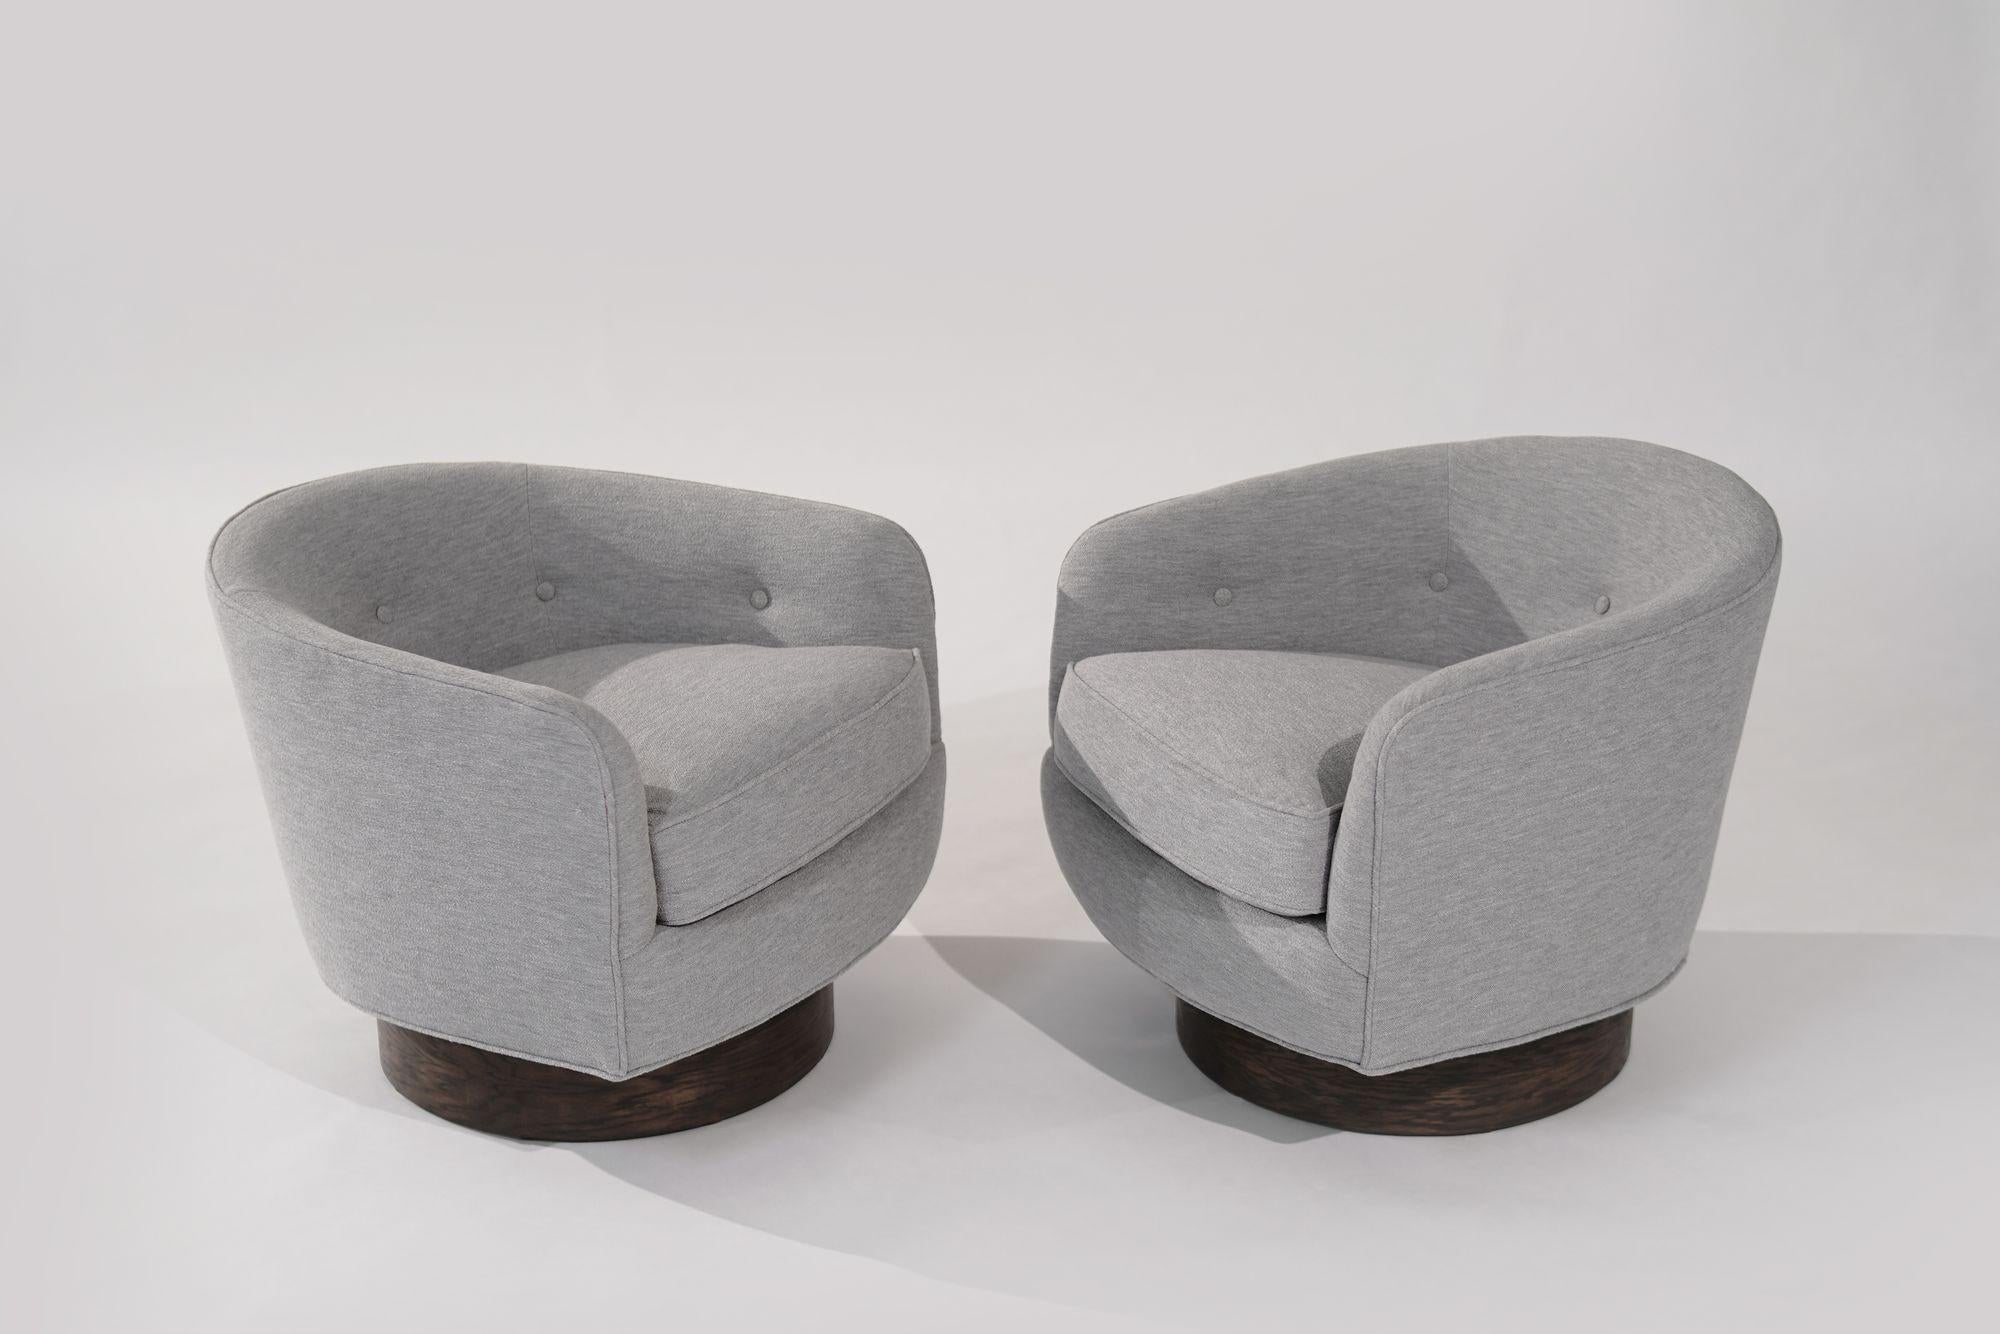 American Set of Swivel Tilt Lounge Chairs by Milo Baughman, C. 1960s For Sale